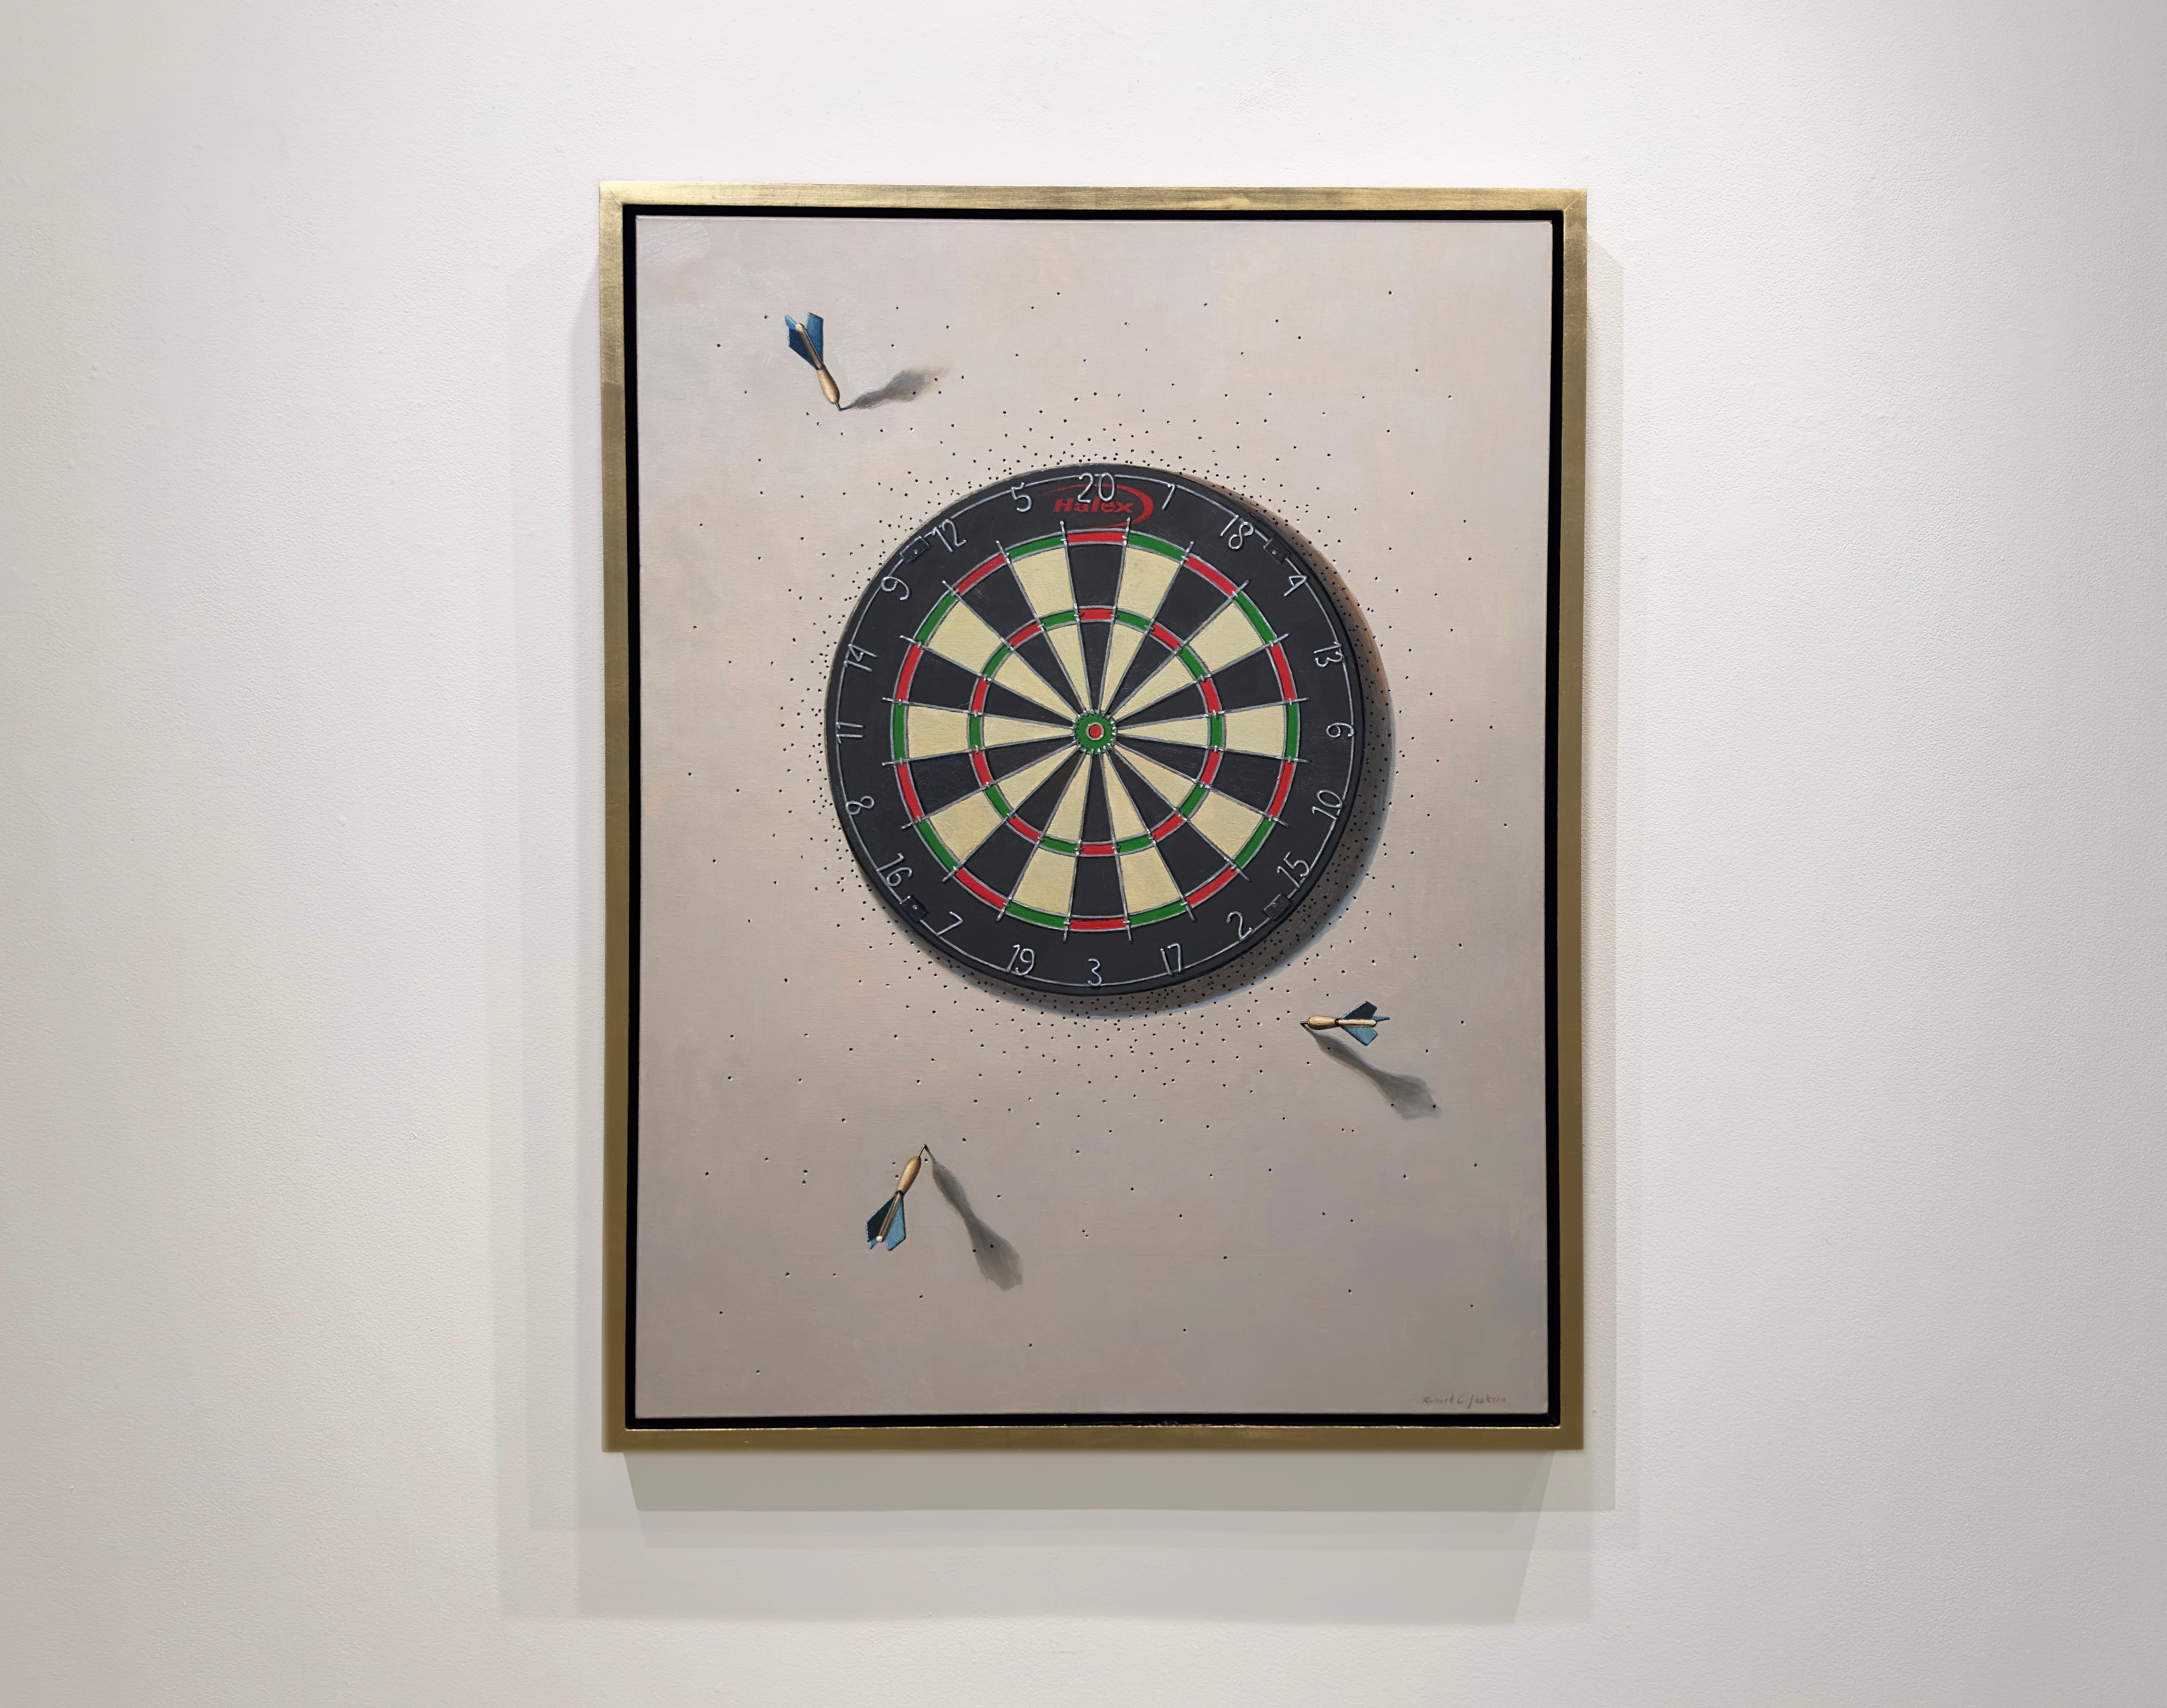 OUT OF PRACTICE - Trompe L'oeil / Contemporary Realism / Dartboard / Games - Painting by Robert Jackson